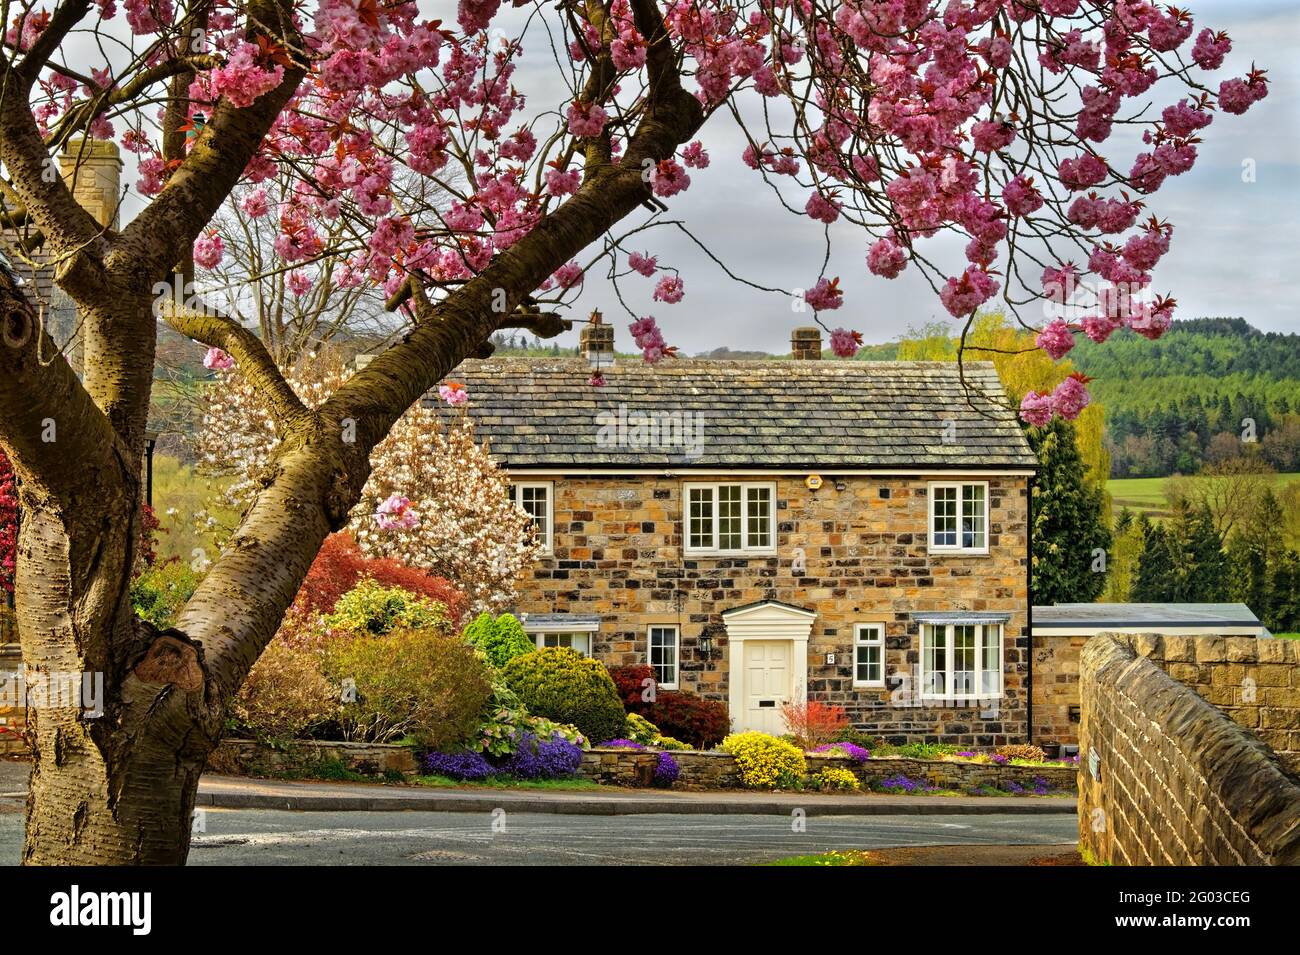 UK, South Yorkshire, Barnsley, Horn Croft House and Cherry Blossom Stock Photo